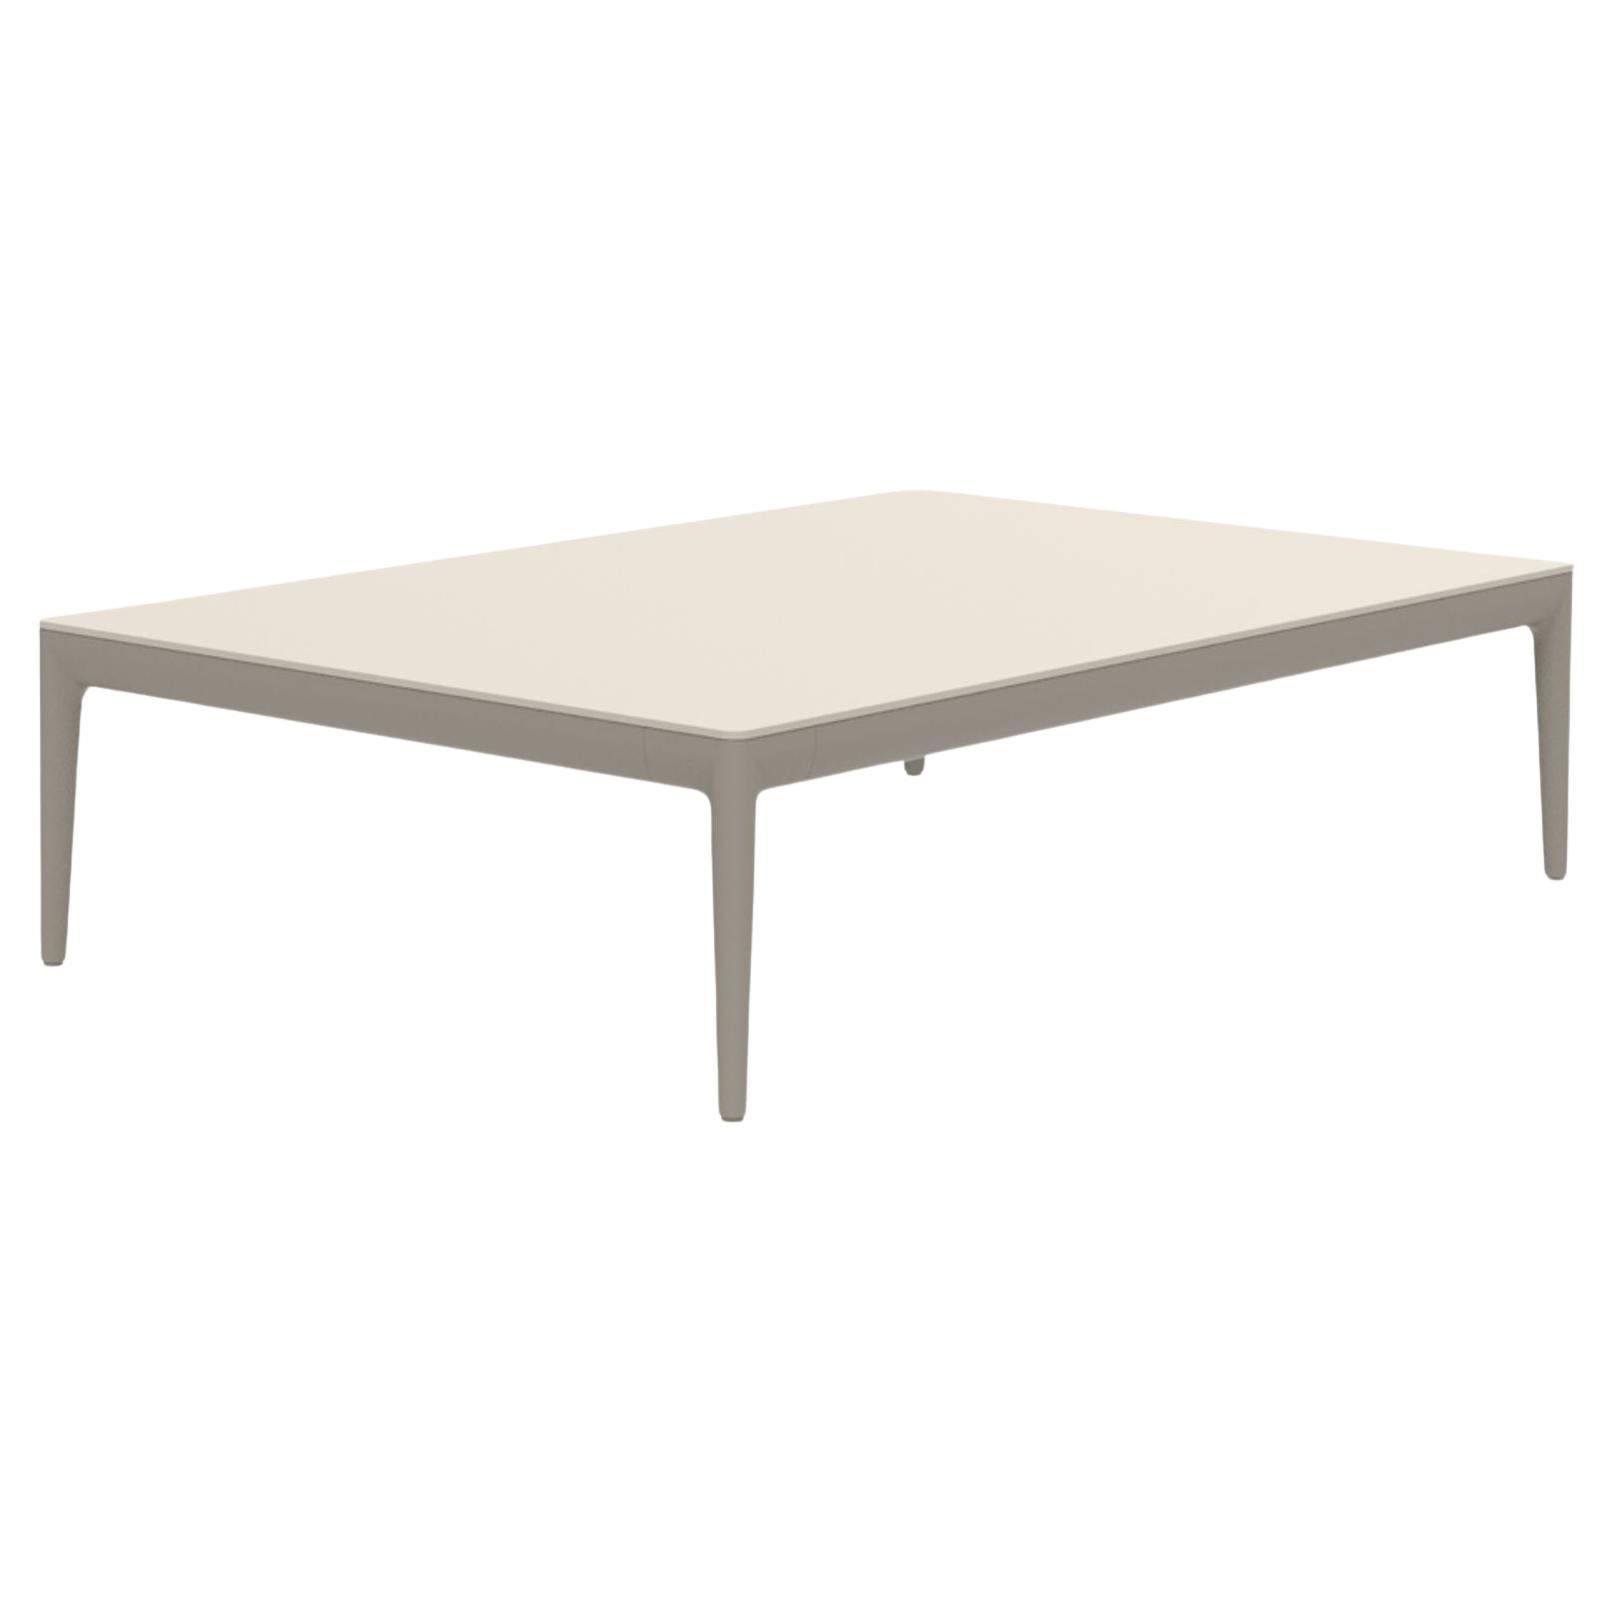 Ribbons Cream 115 Coffee Table by Mowee For Sale